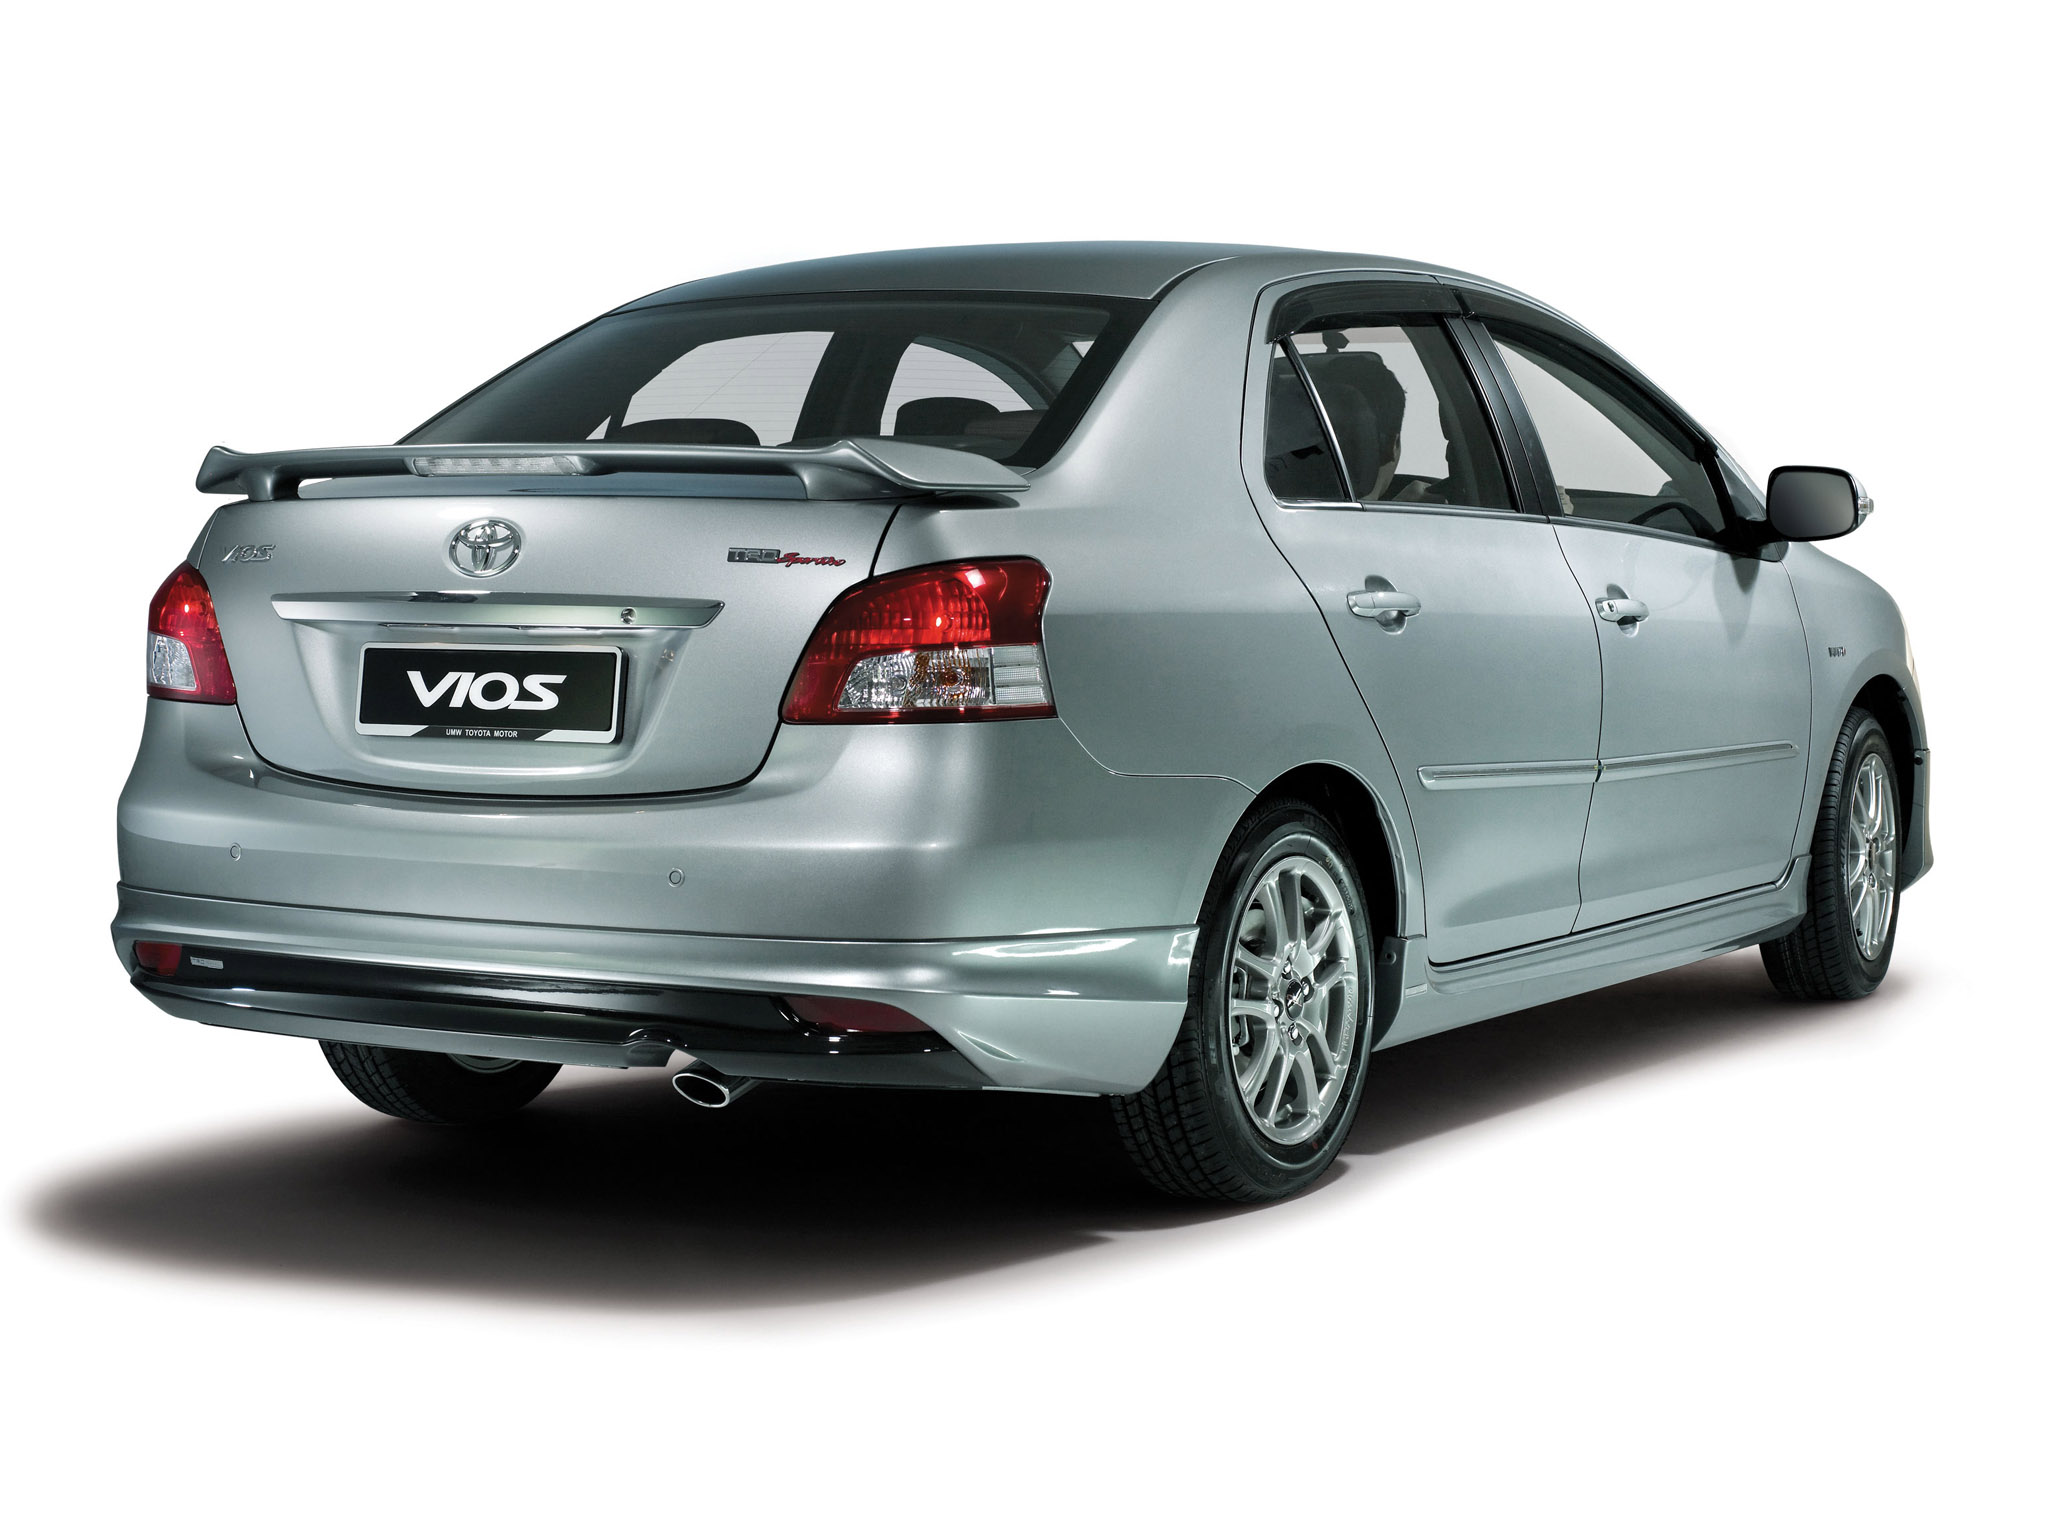 Car in pictures – car photo gallery » TRD Toyota Vios Sportivo 2008